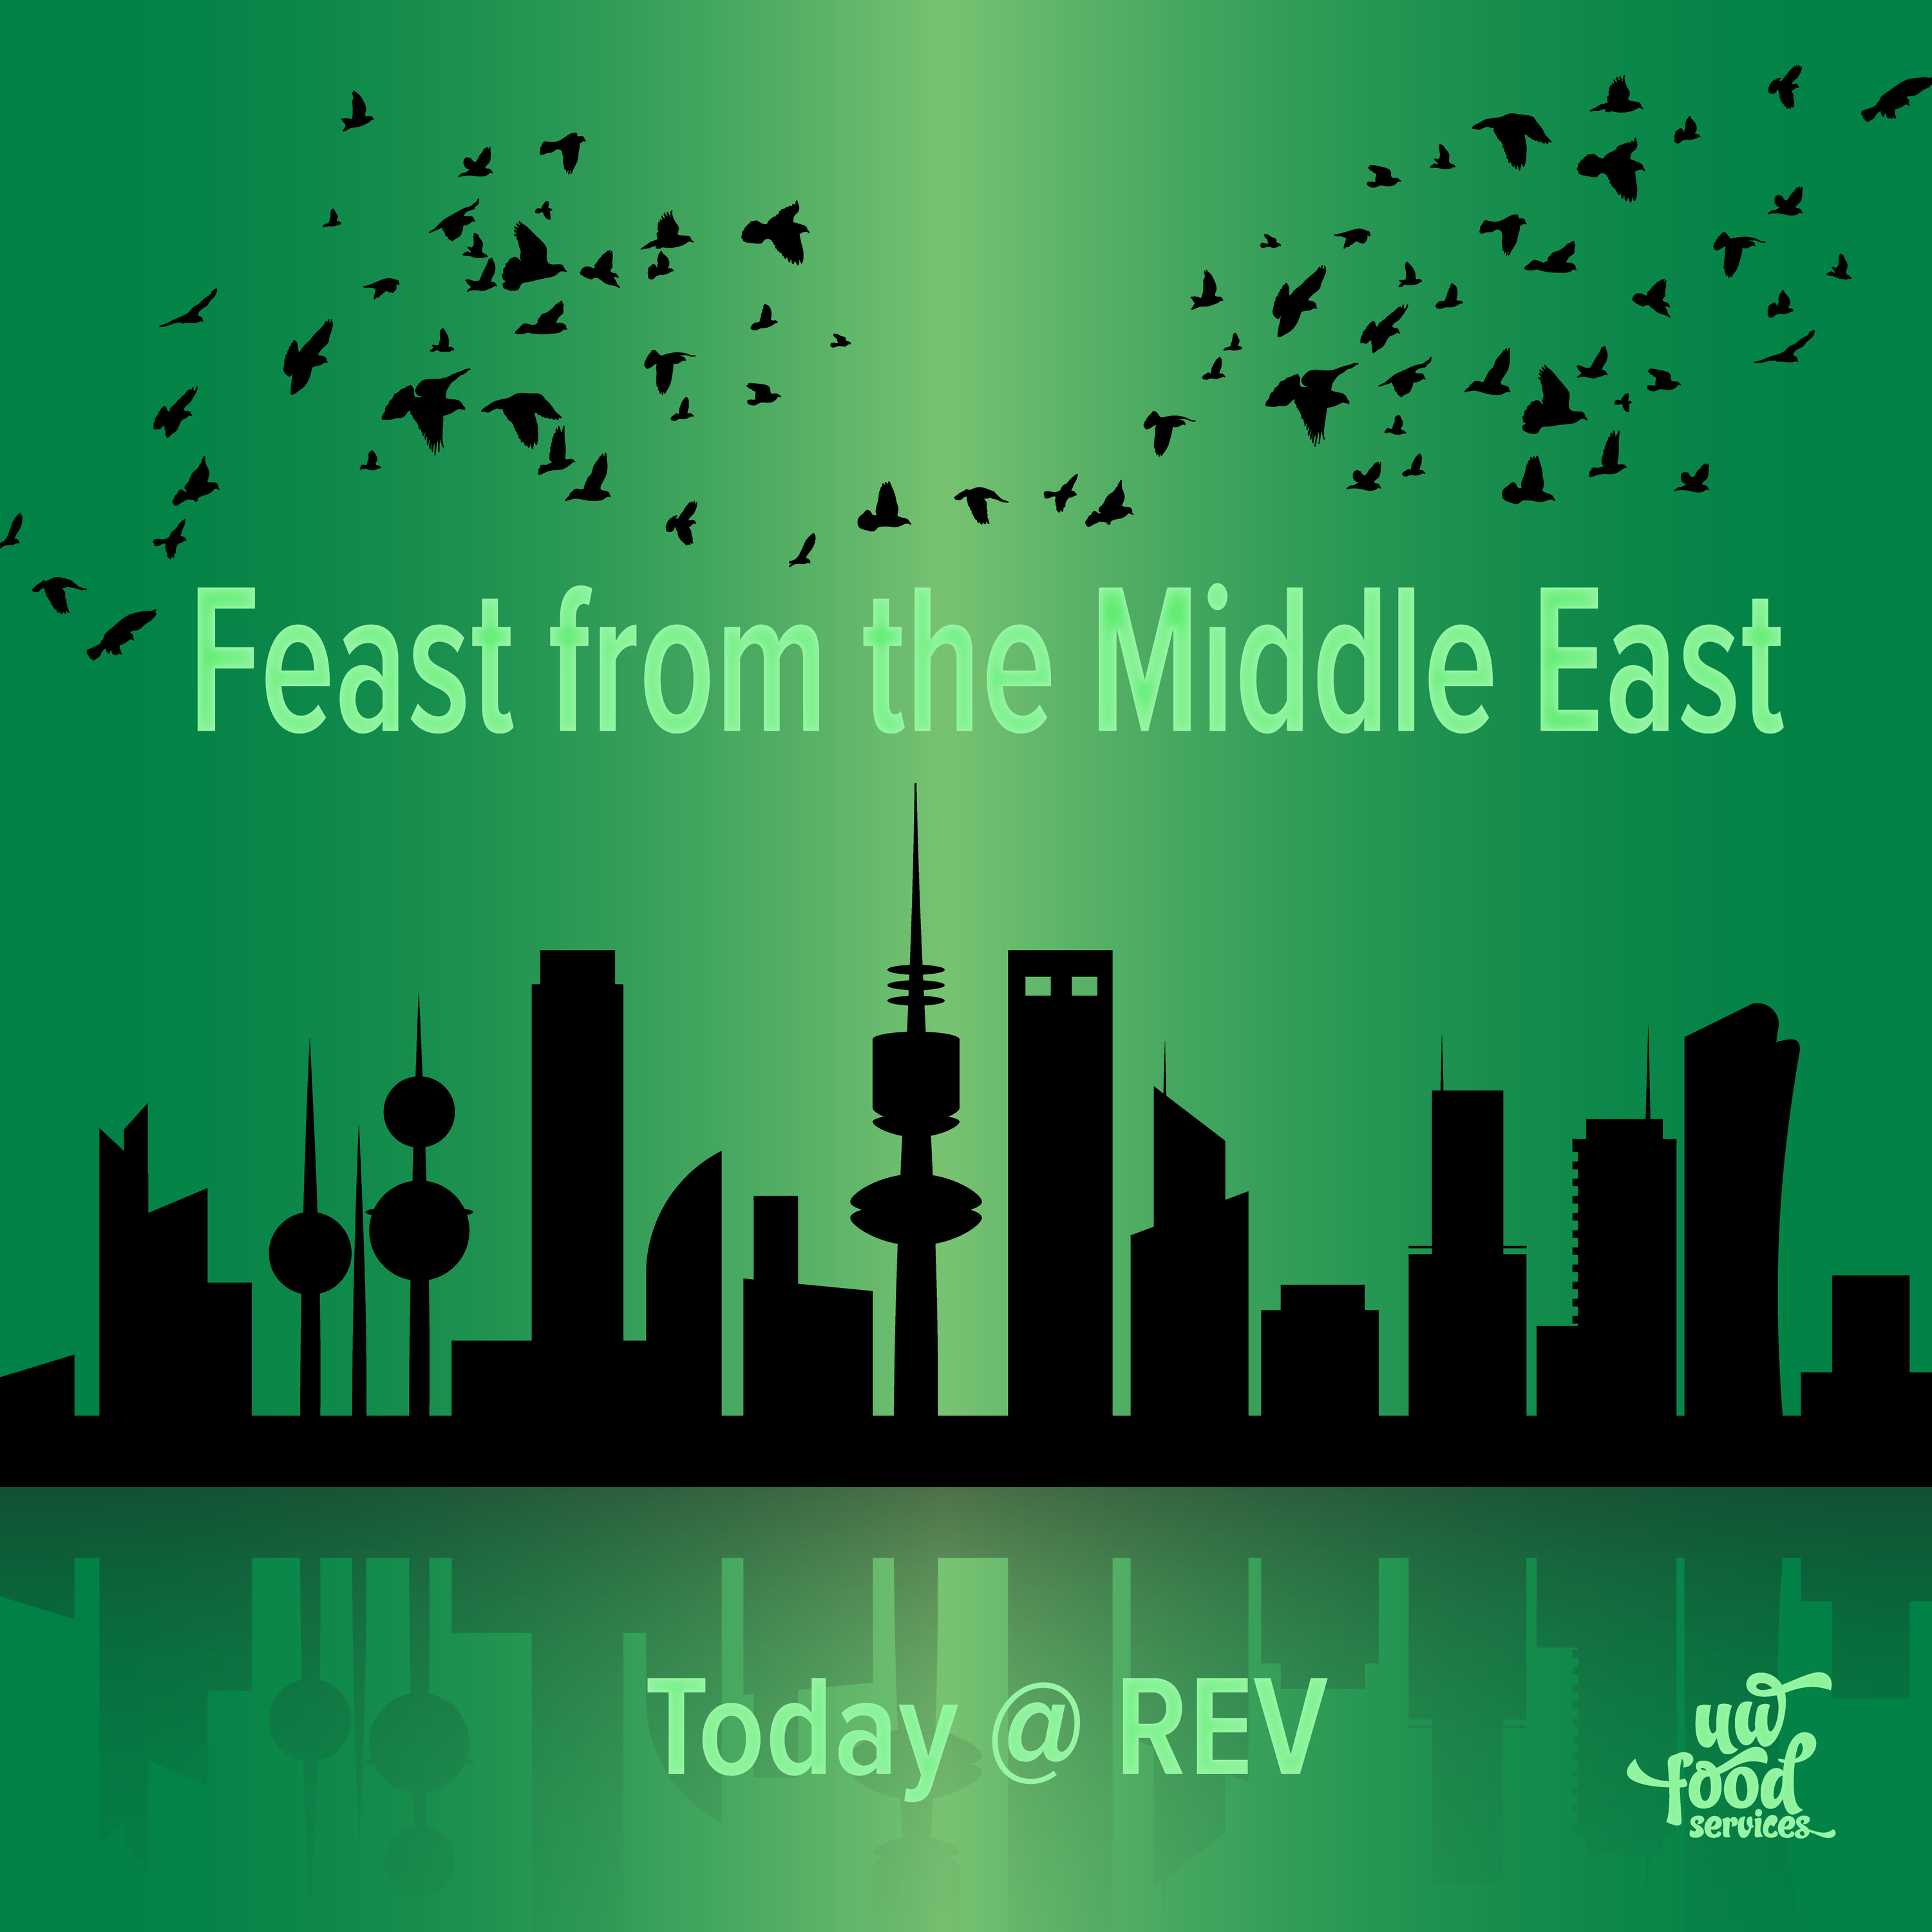 Feast from the Middle East poster